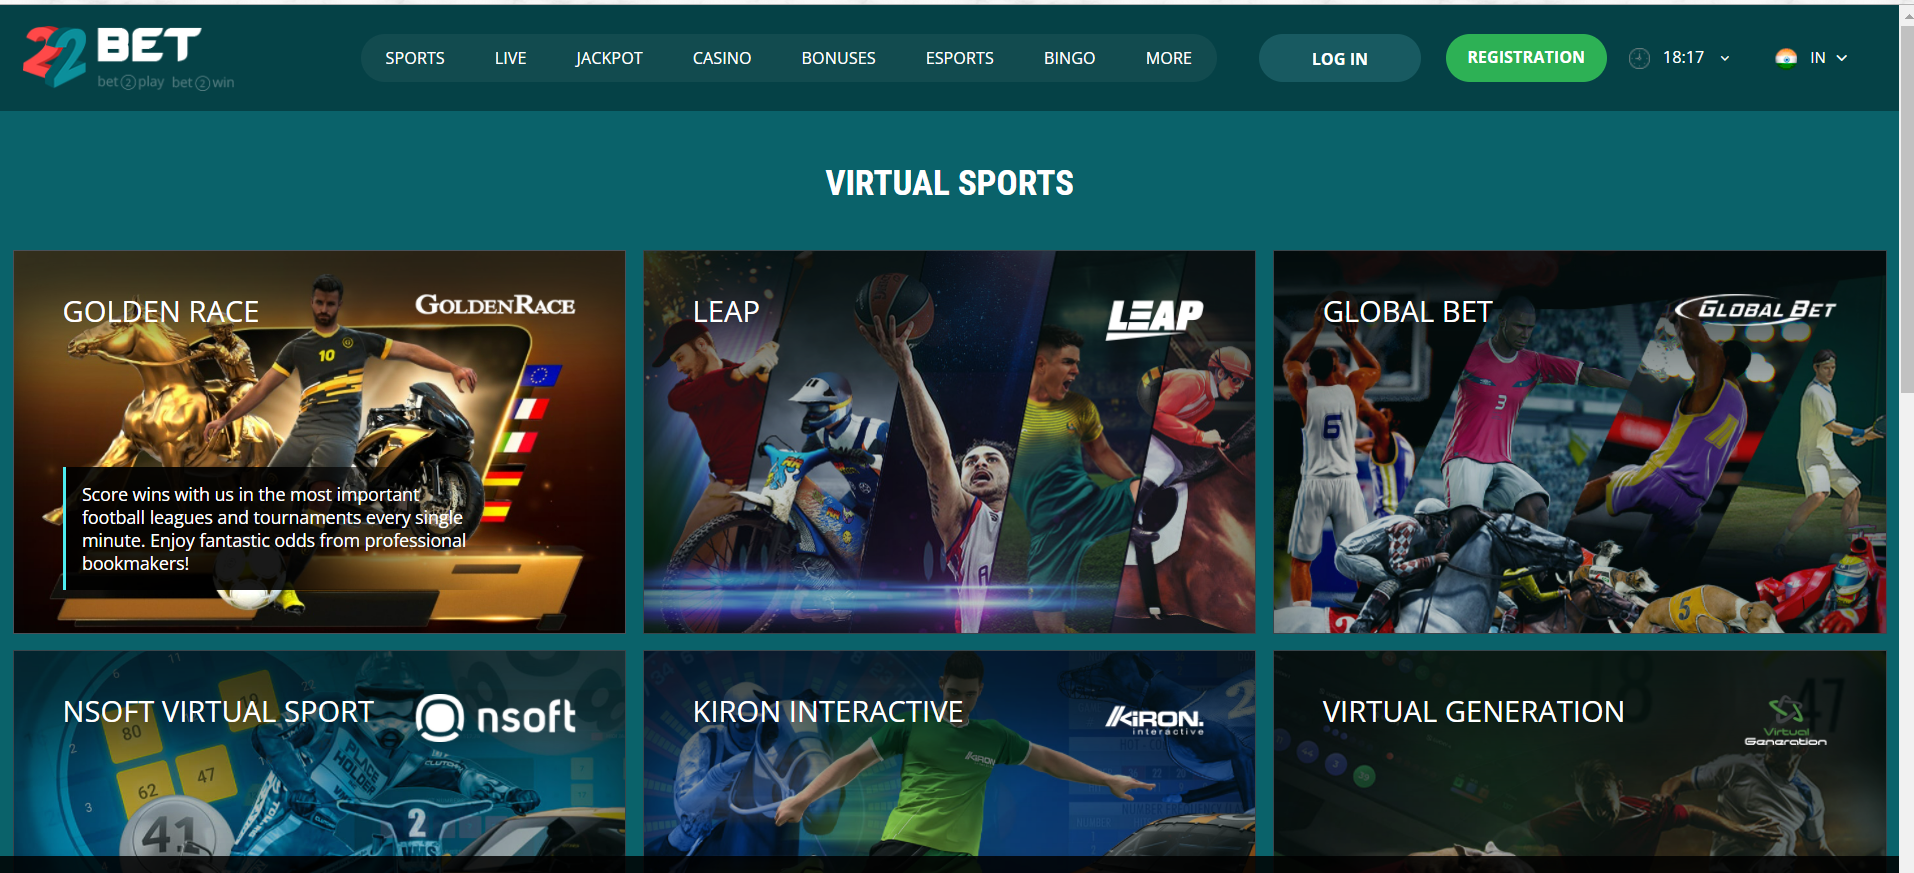 Webpage of the 22BET company, showing the virtual sports page.